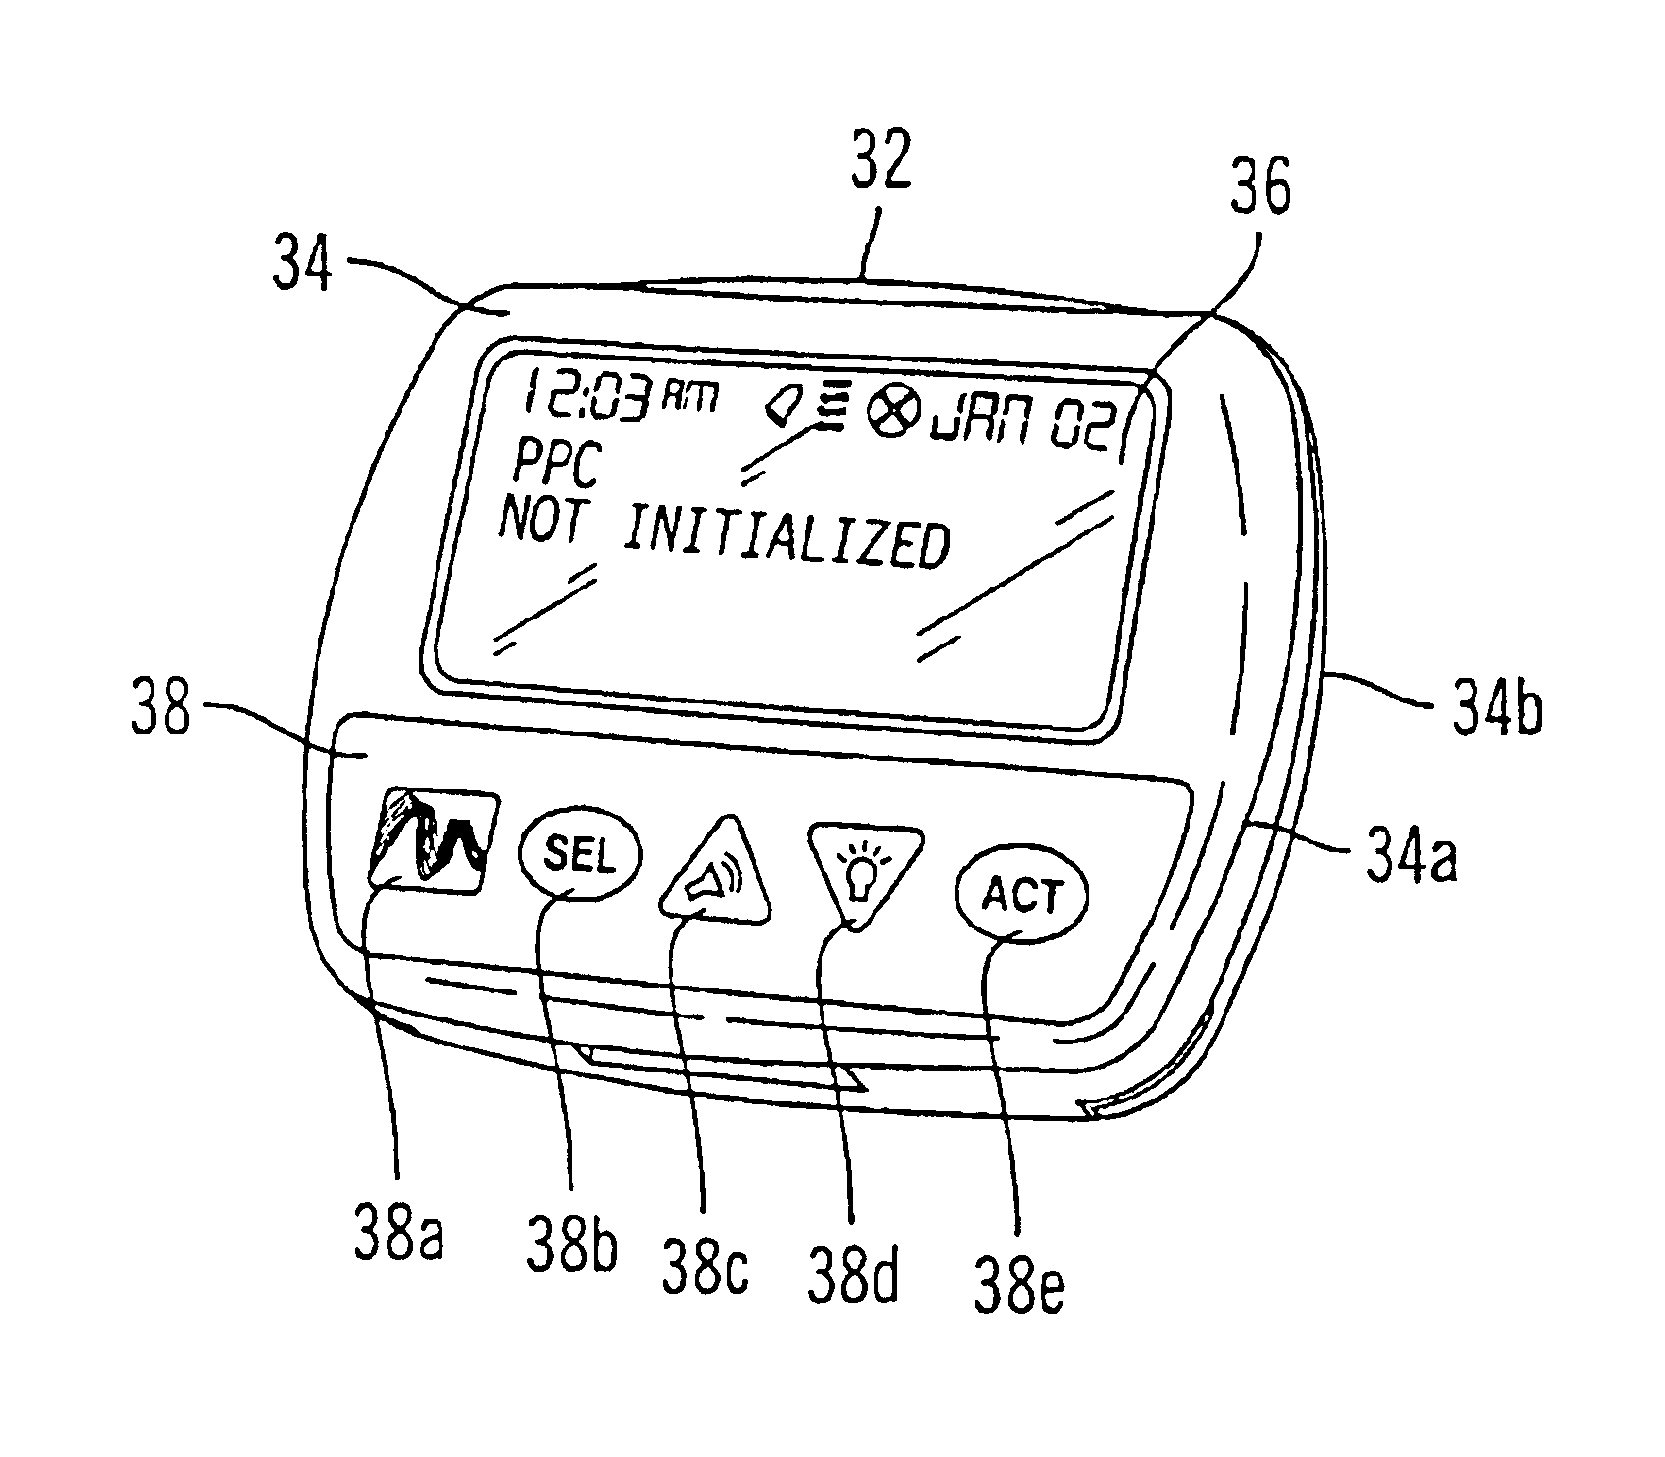 Microprocessor controlled ambulatory medical apparatus with hand held communication device